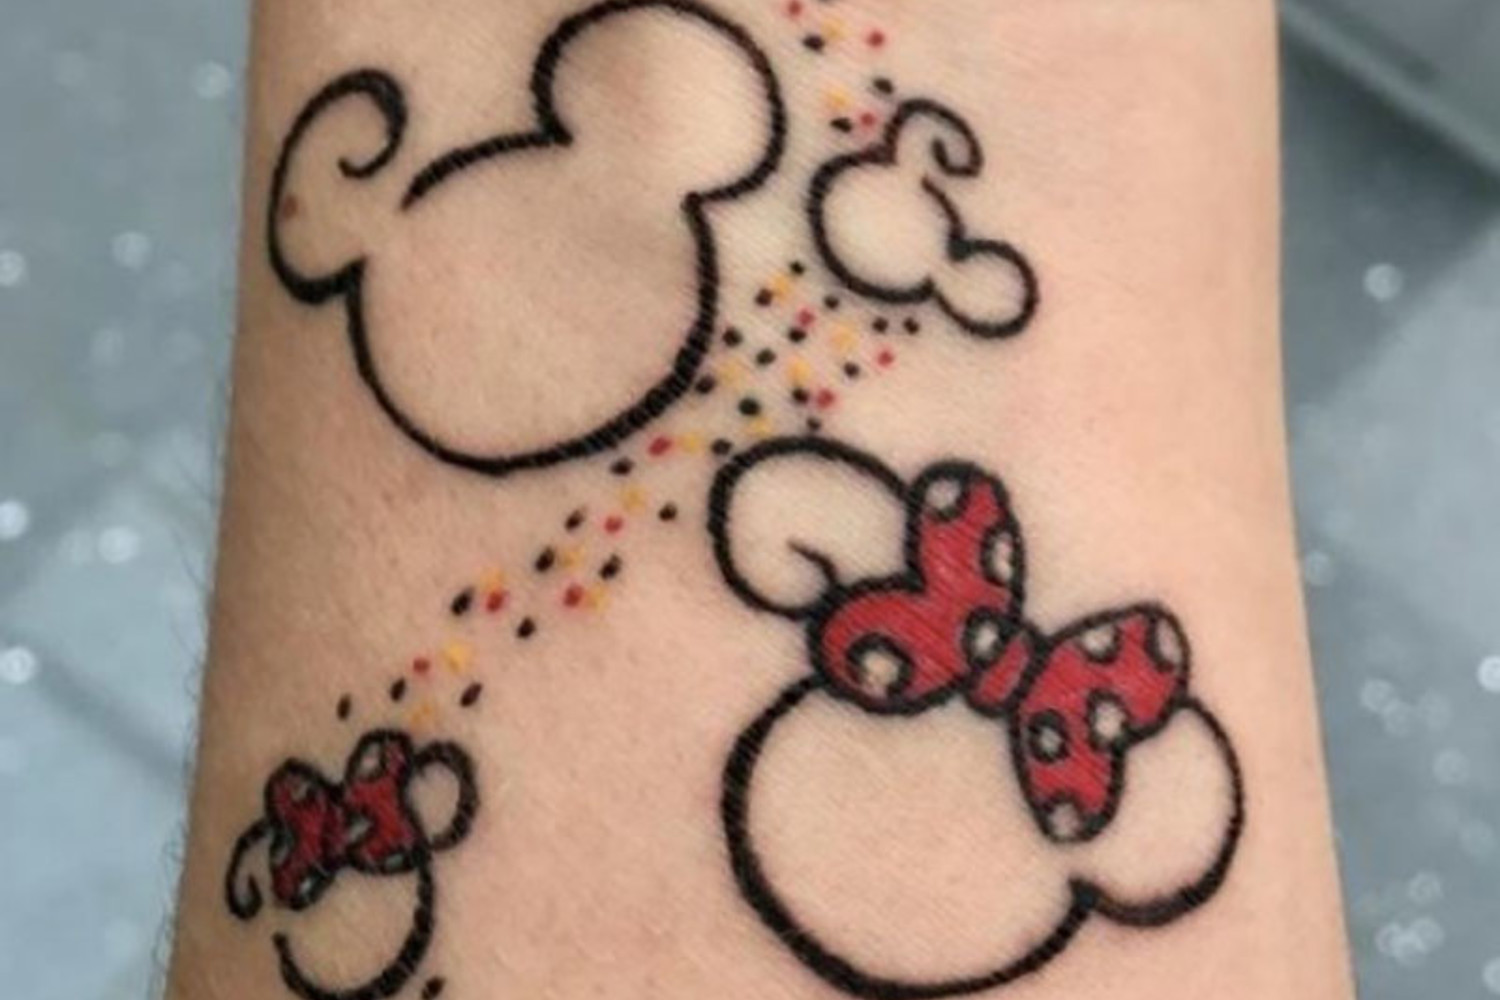 The Top 39 Mickey Mouse Tattoo Ideas  2021 Inspiration Guide